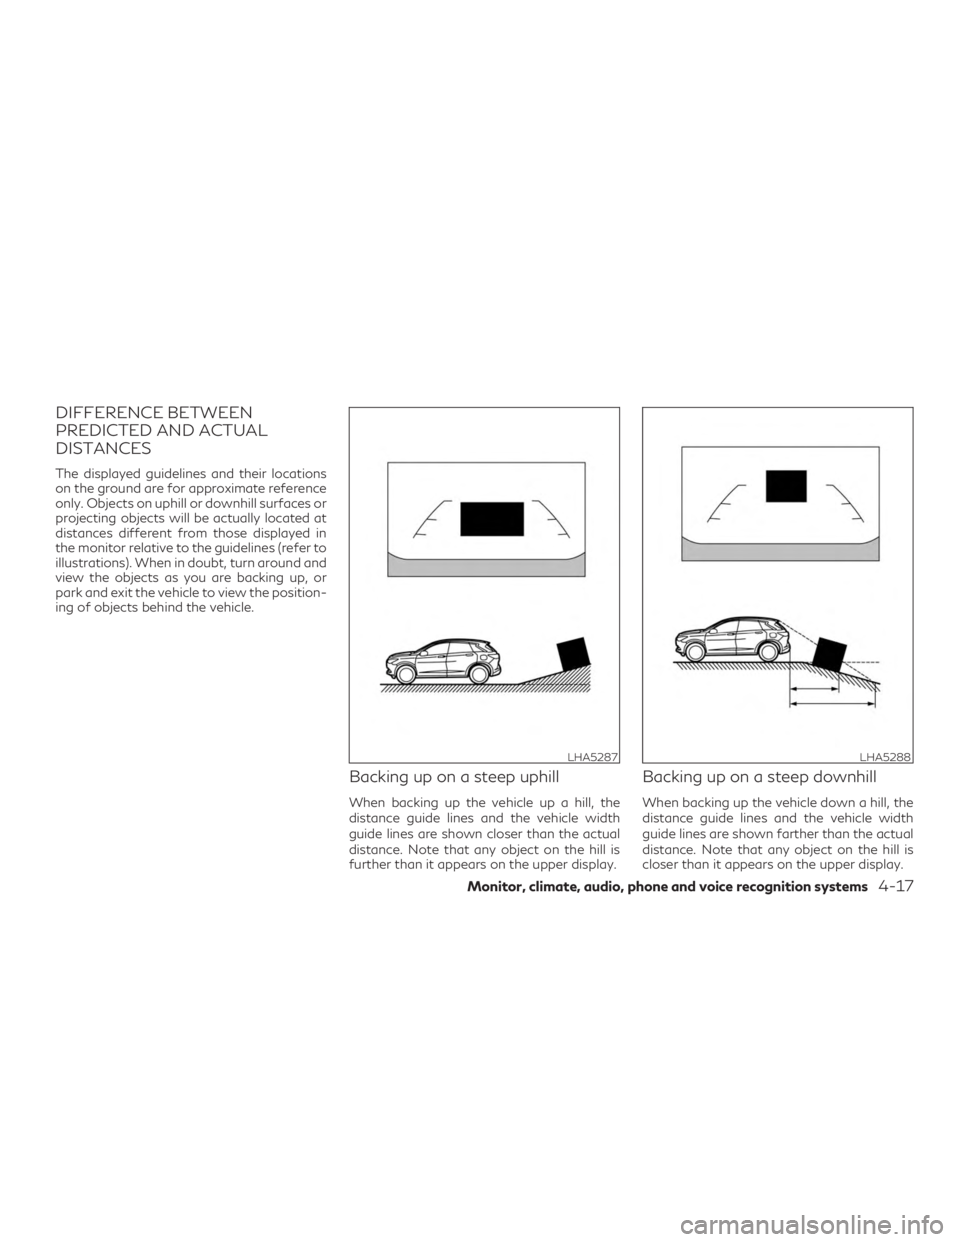 INFINITI QX50 2020  Owners Manual DIFFERENCE BETWEEN
PREDICTED AND ACTUAL
DISTANCES
The displayed guidelines and their locations
on the ground are for approximate reference
only. Objects on uphill or downhill surfaces or
projecting ob